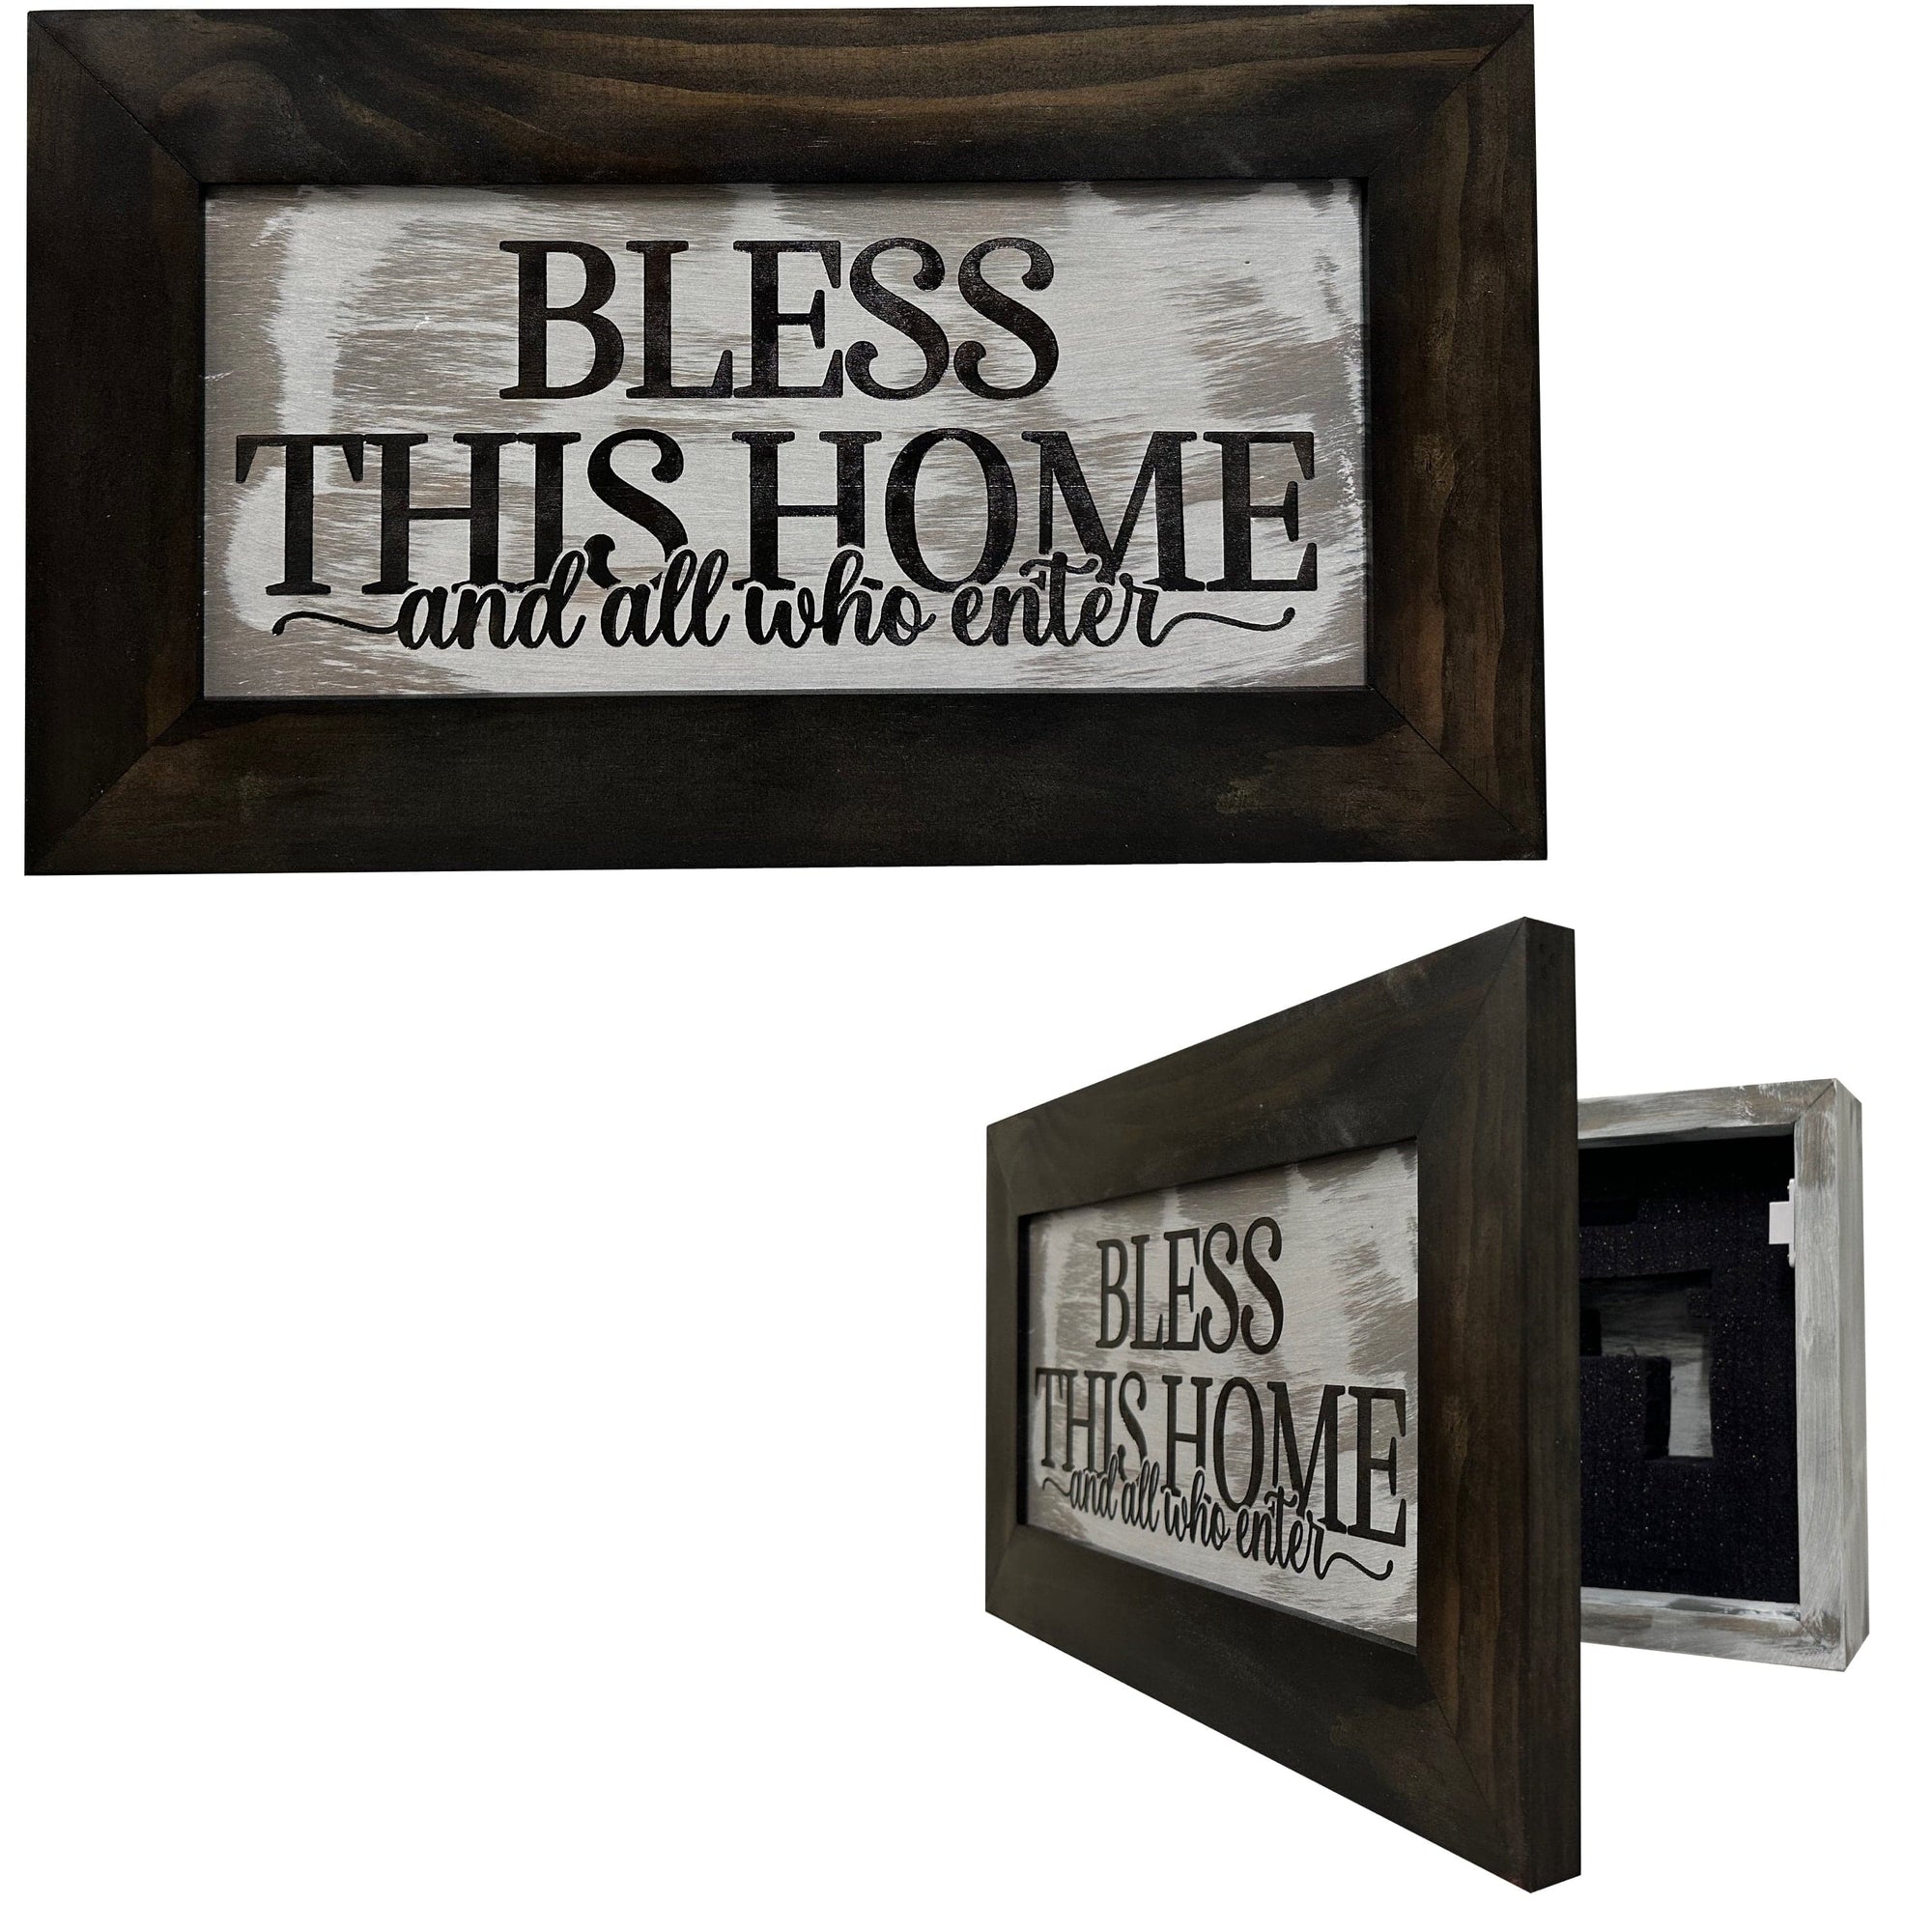 Bless This Home And All Who Enter Decorative Wall-Mounted Secure Gun Cabinet Armadillo Safe and Vault